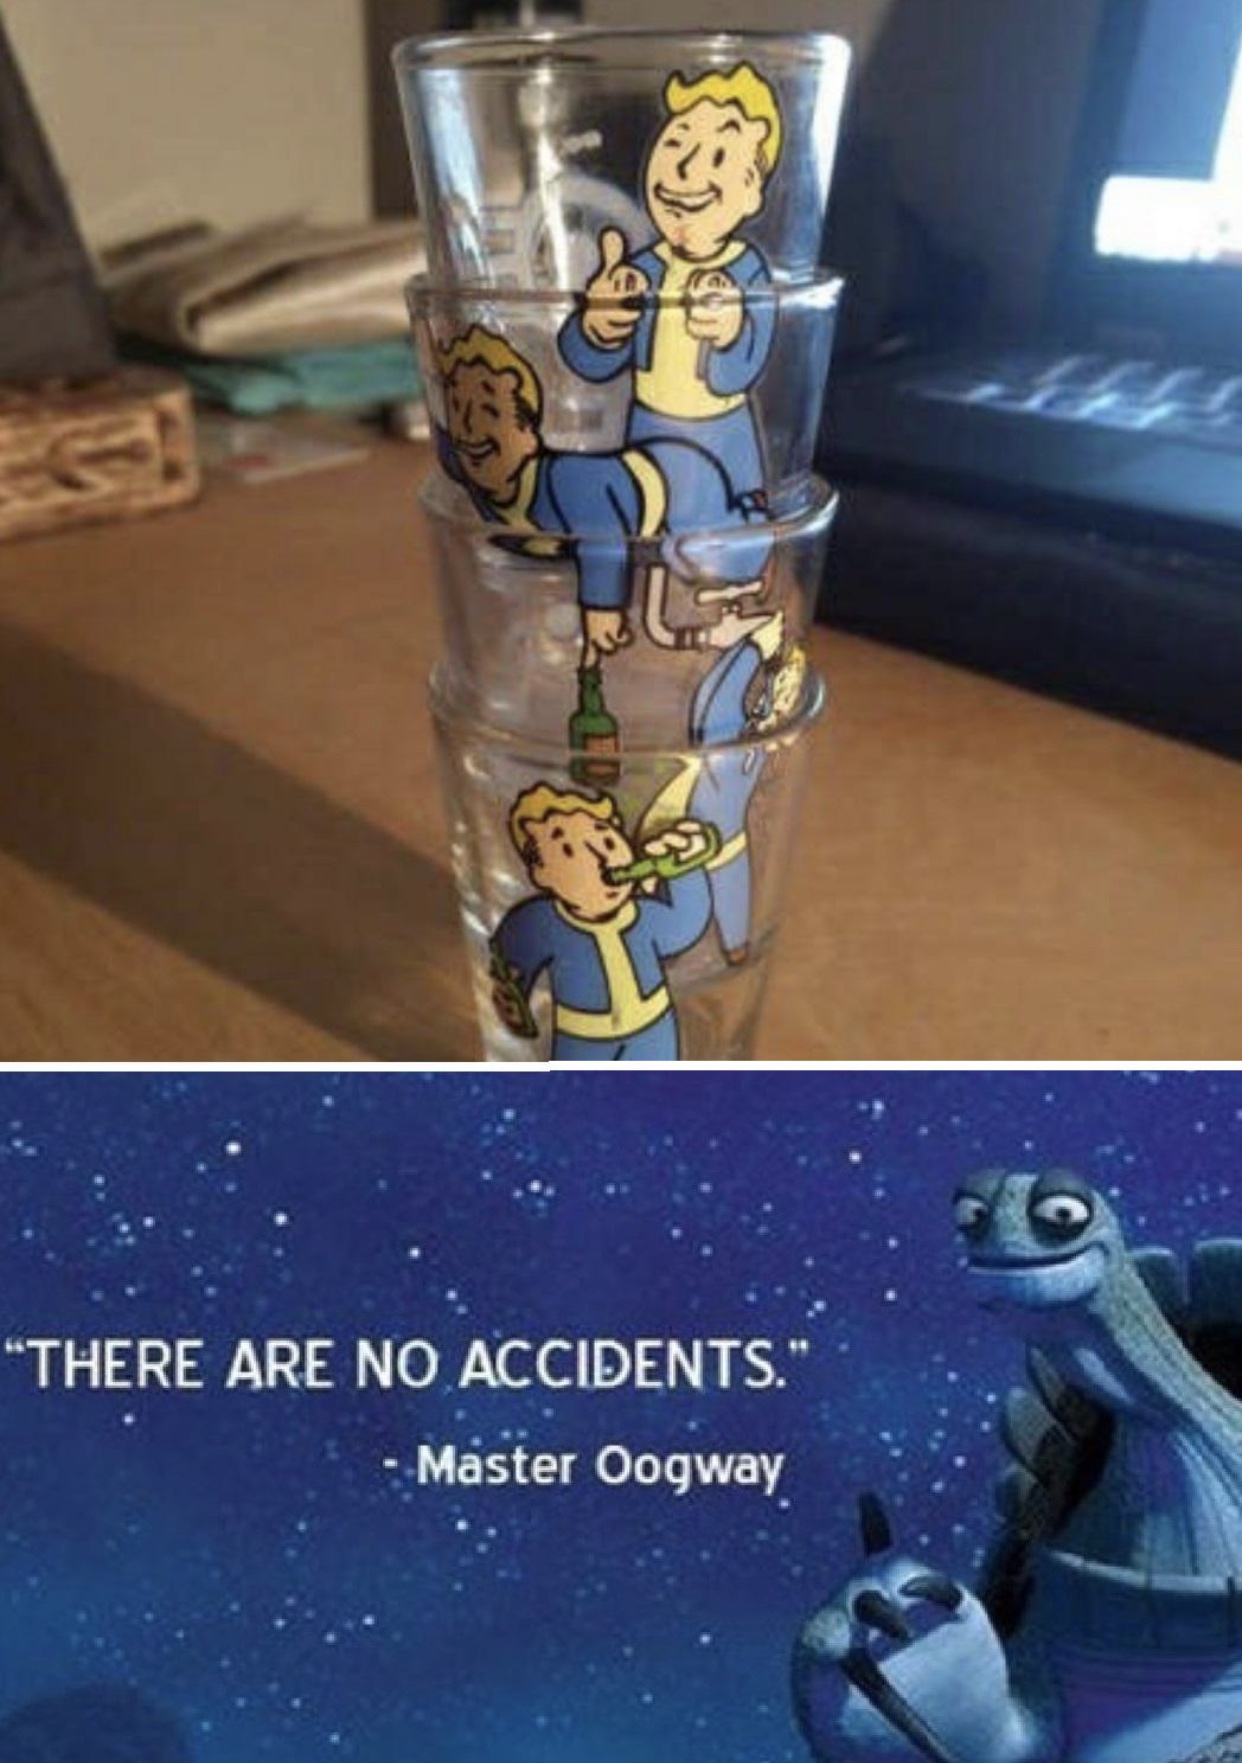 fallout shot glasses - There Are No Accidents." Master Oogway